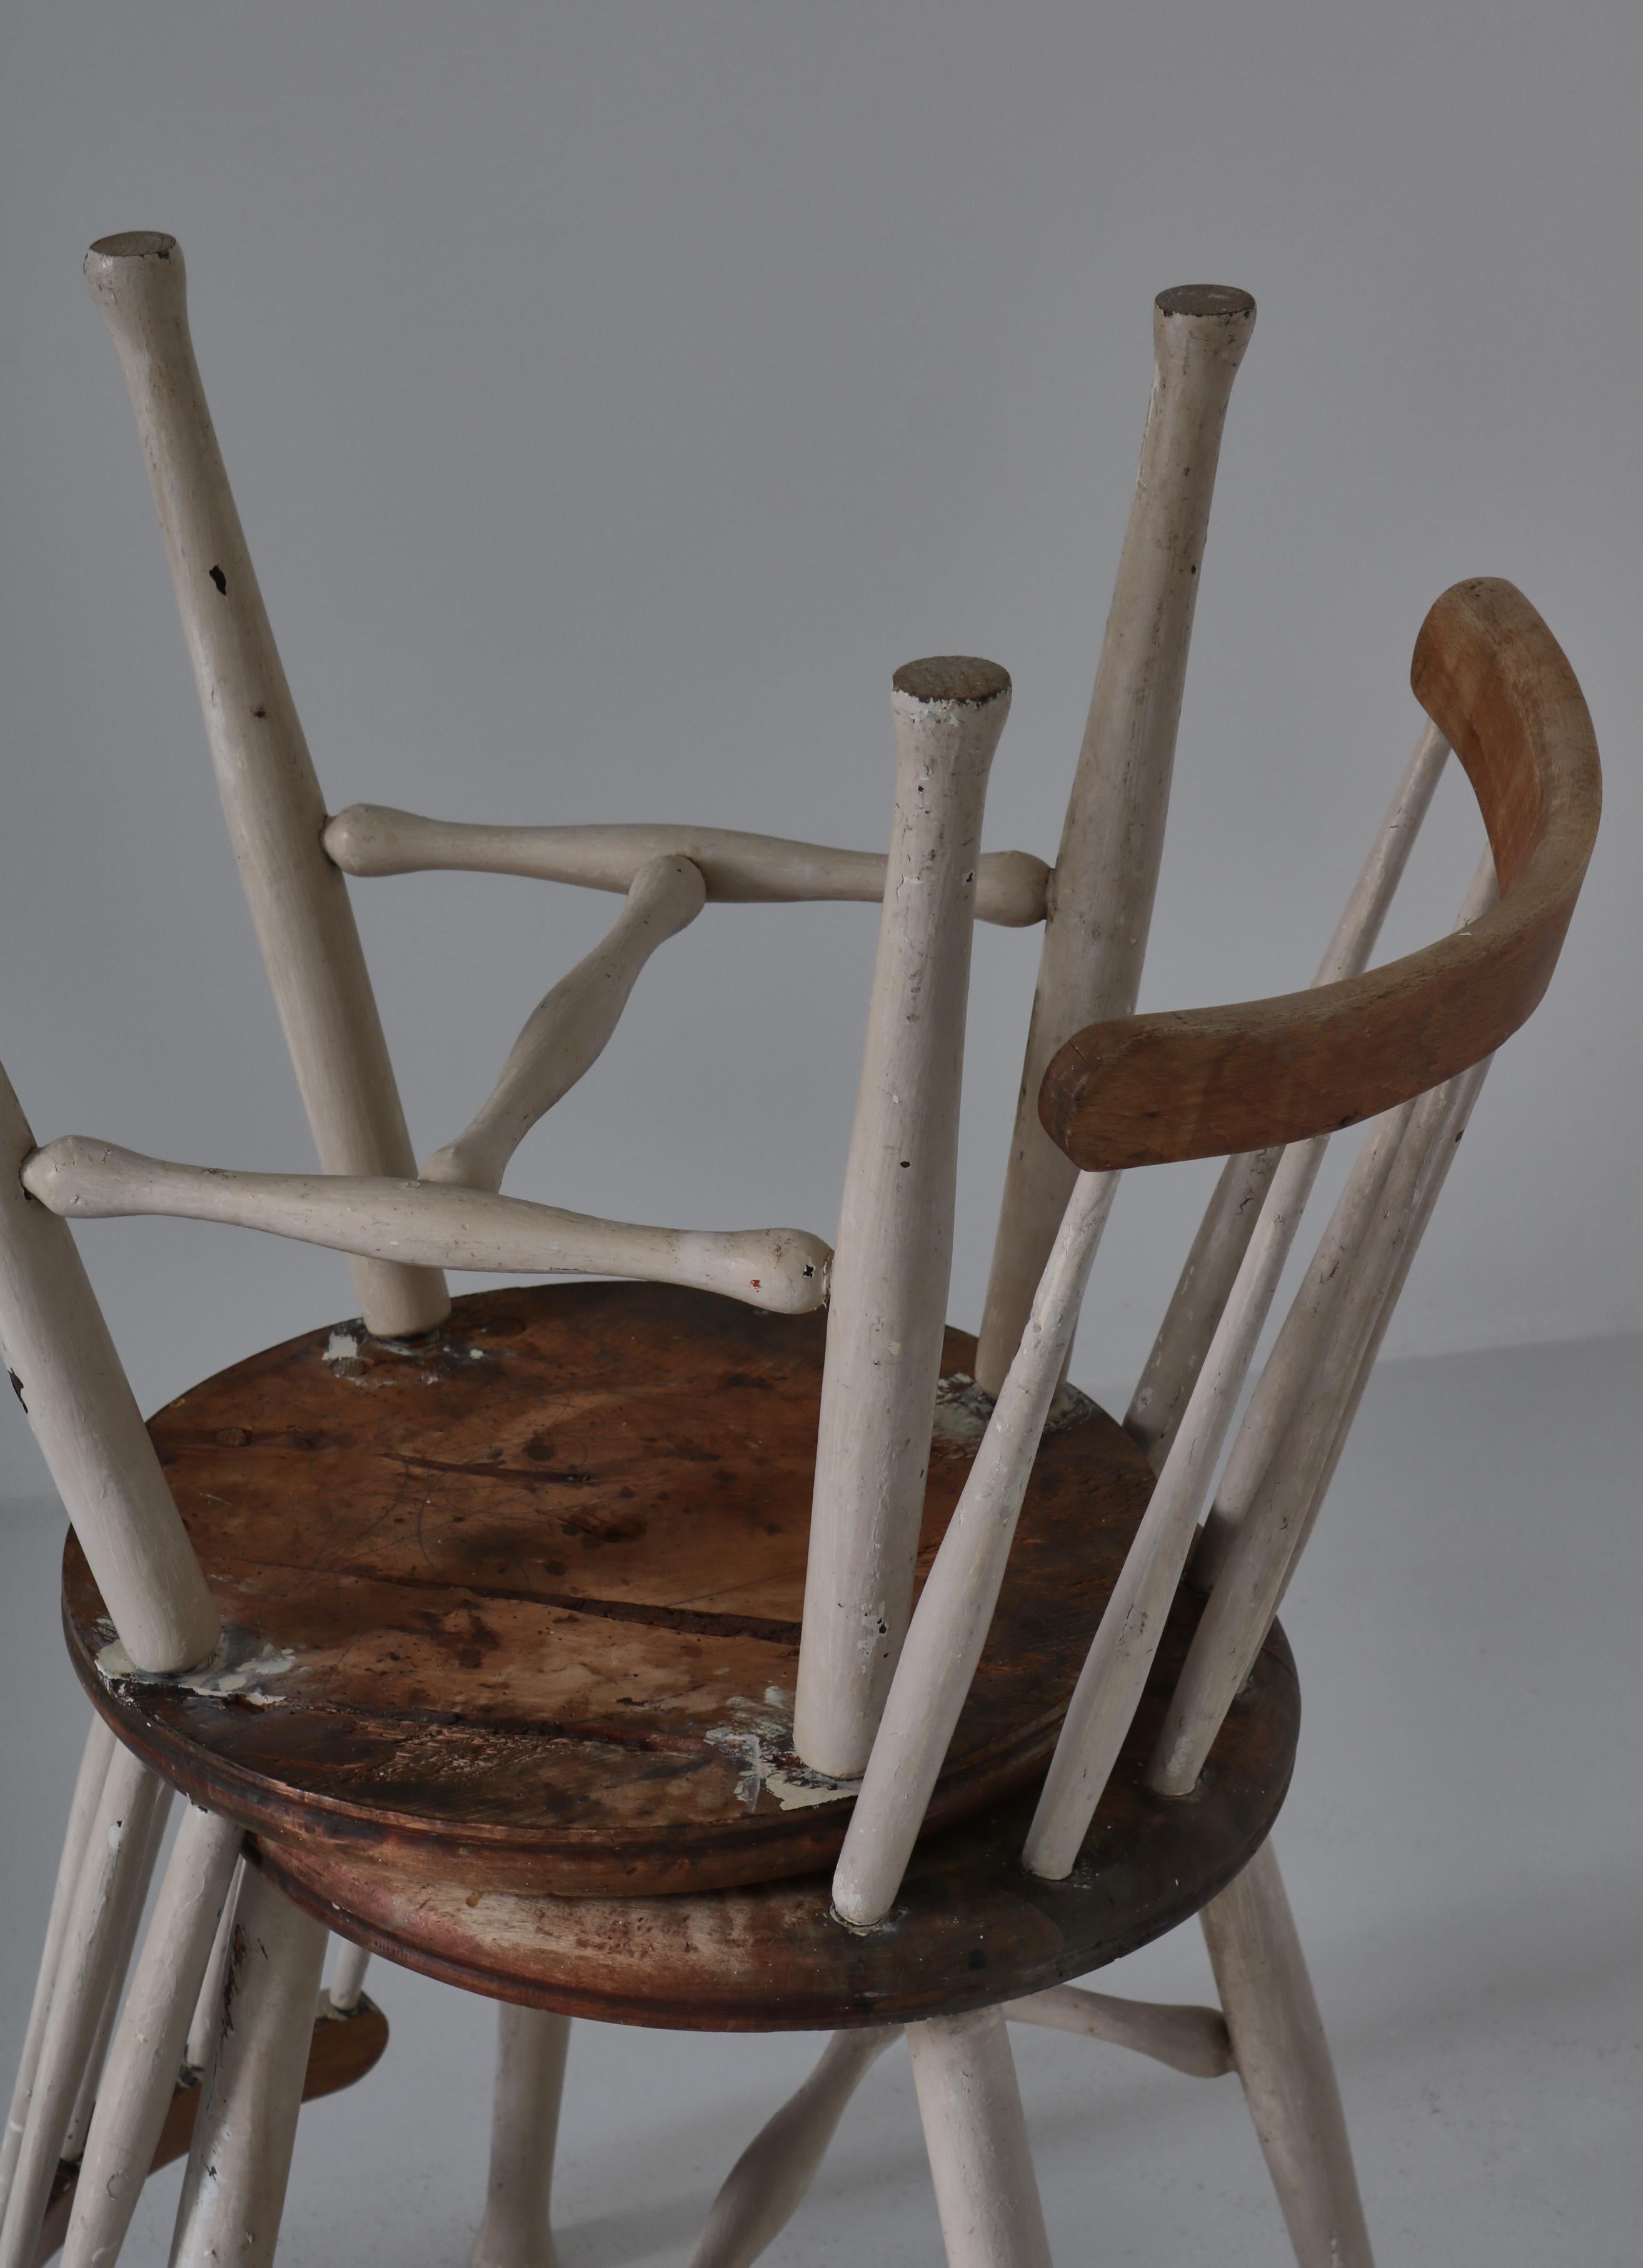 Danish Cabinetmaker Antique Folk Art Spindle Chairs, Early 20th Century For Sale 5